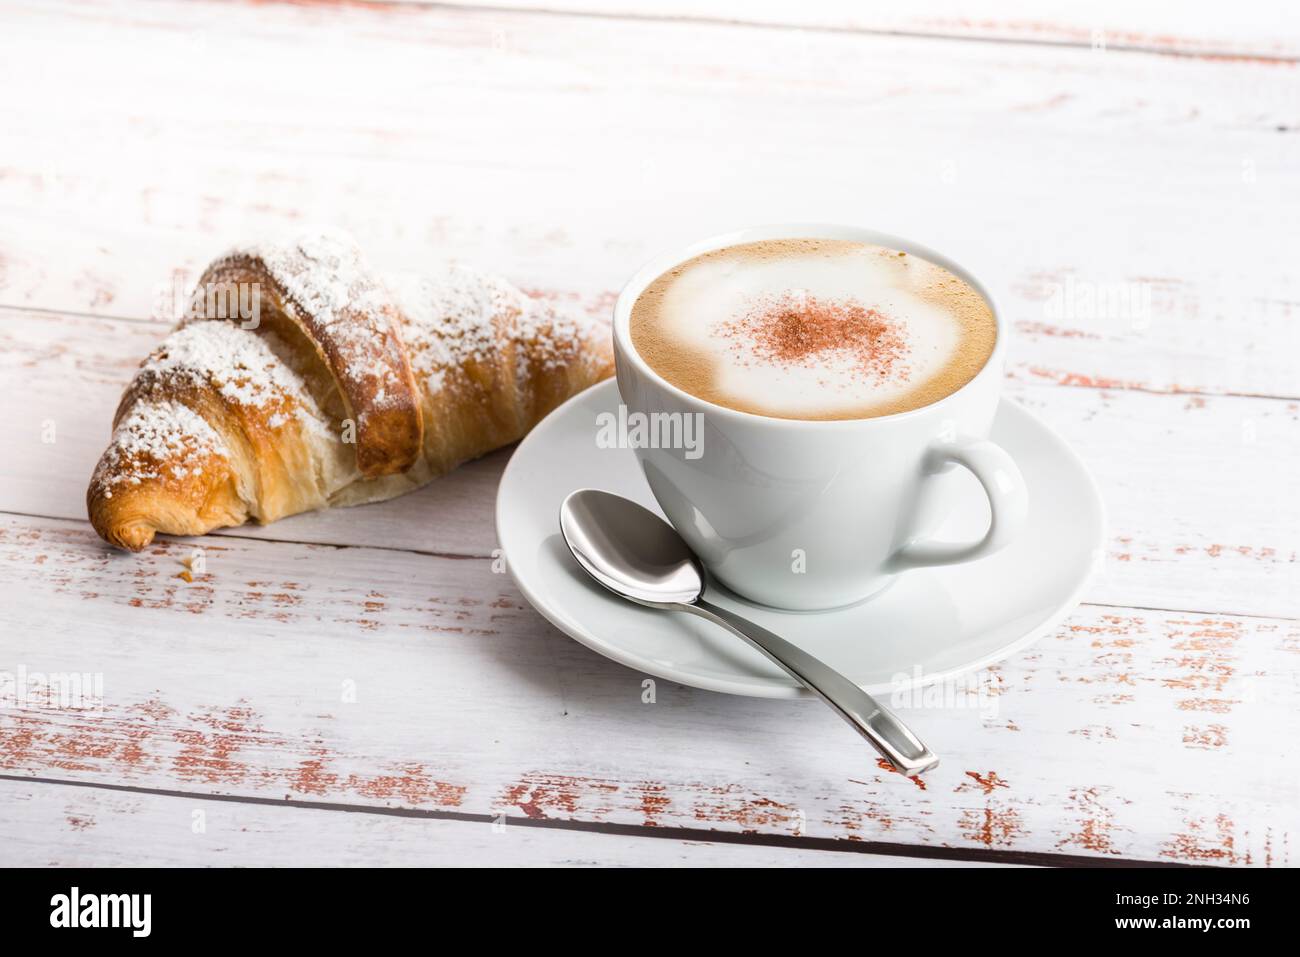 Breakfast with cappuccino and croissant on wooden table. Stock Photo